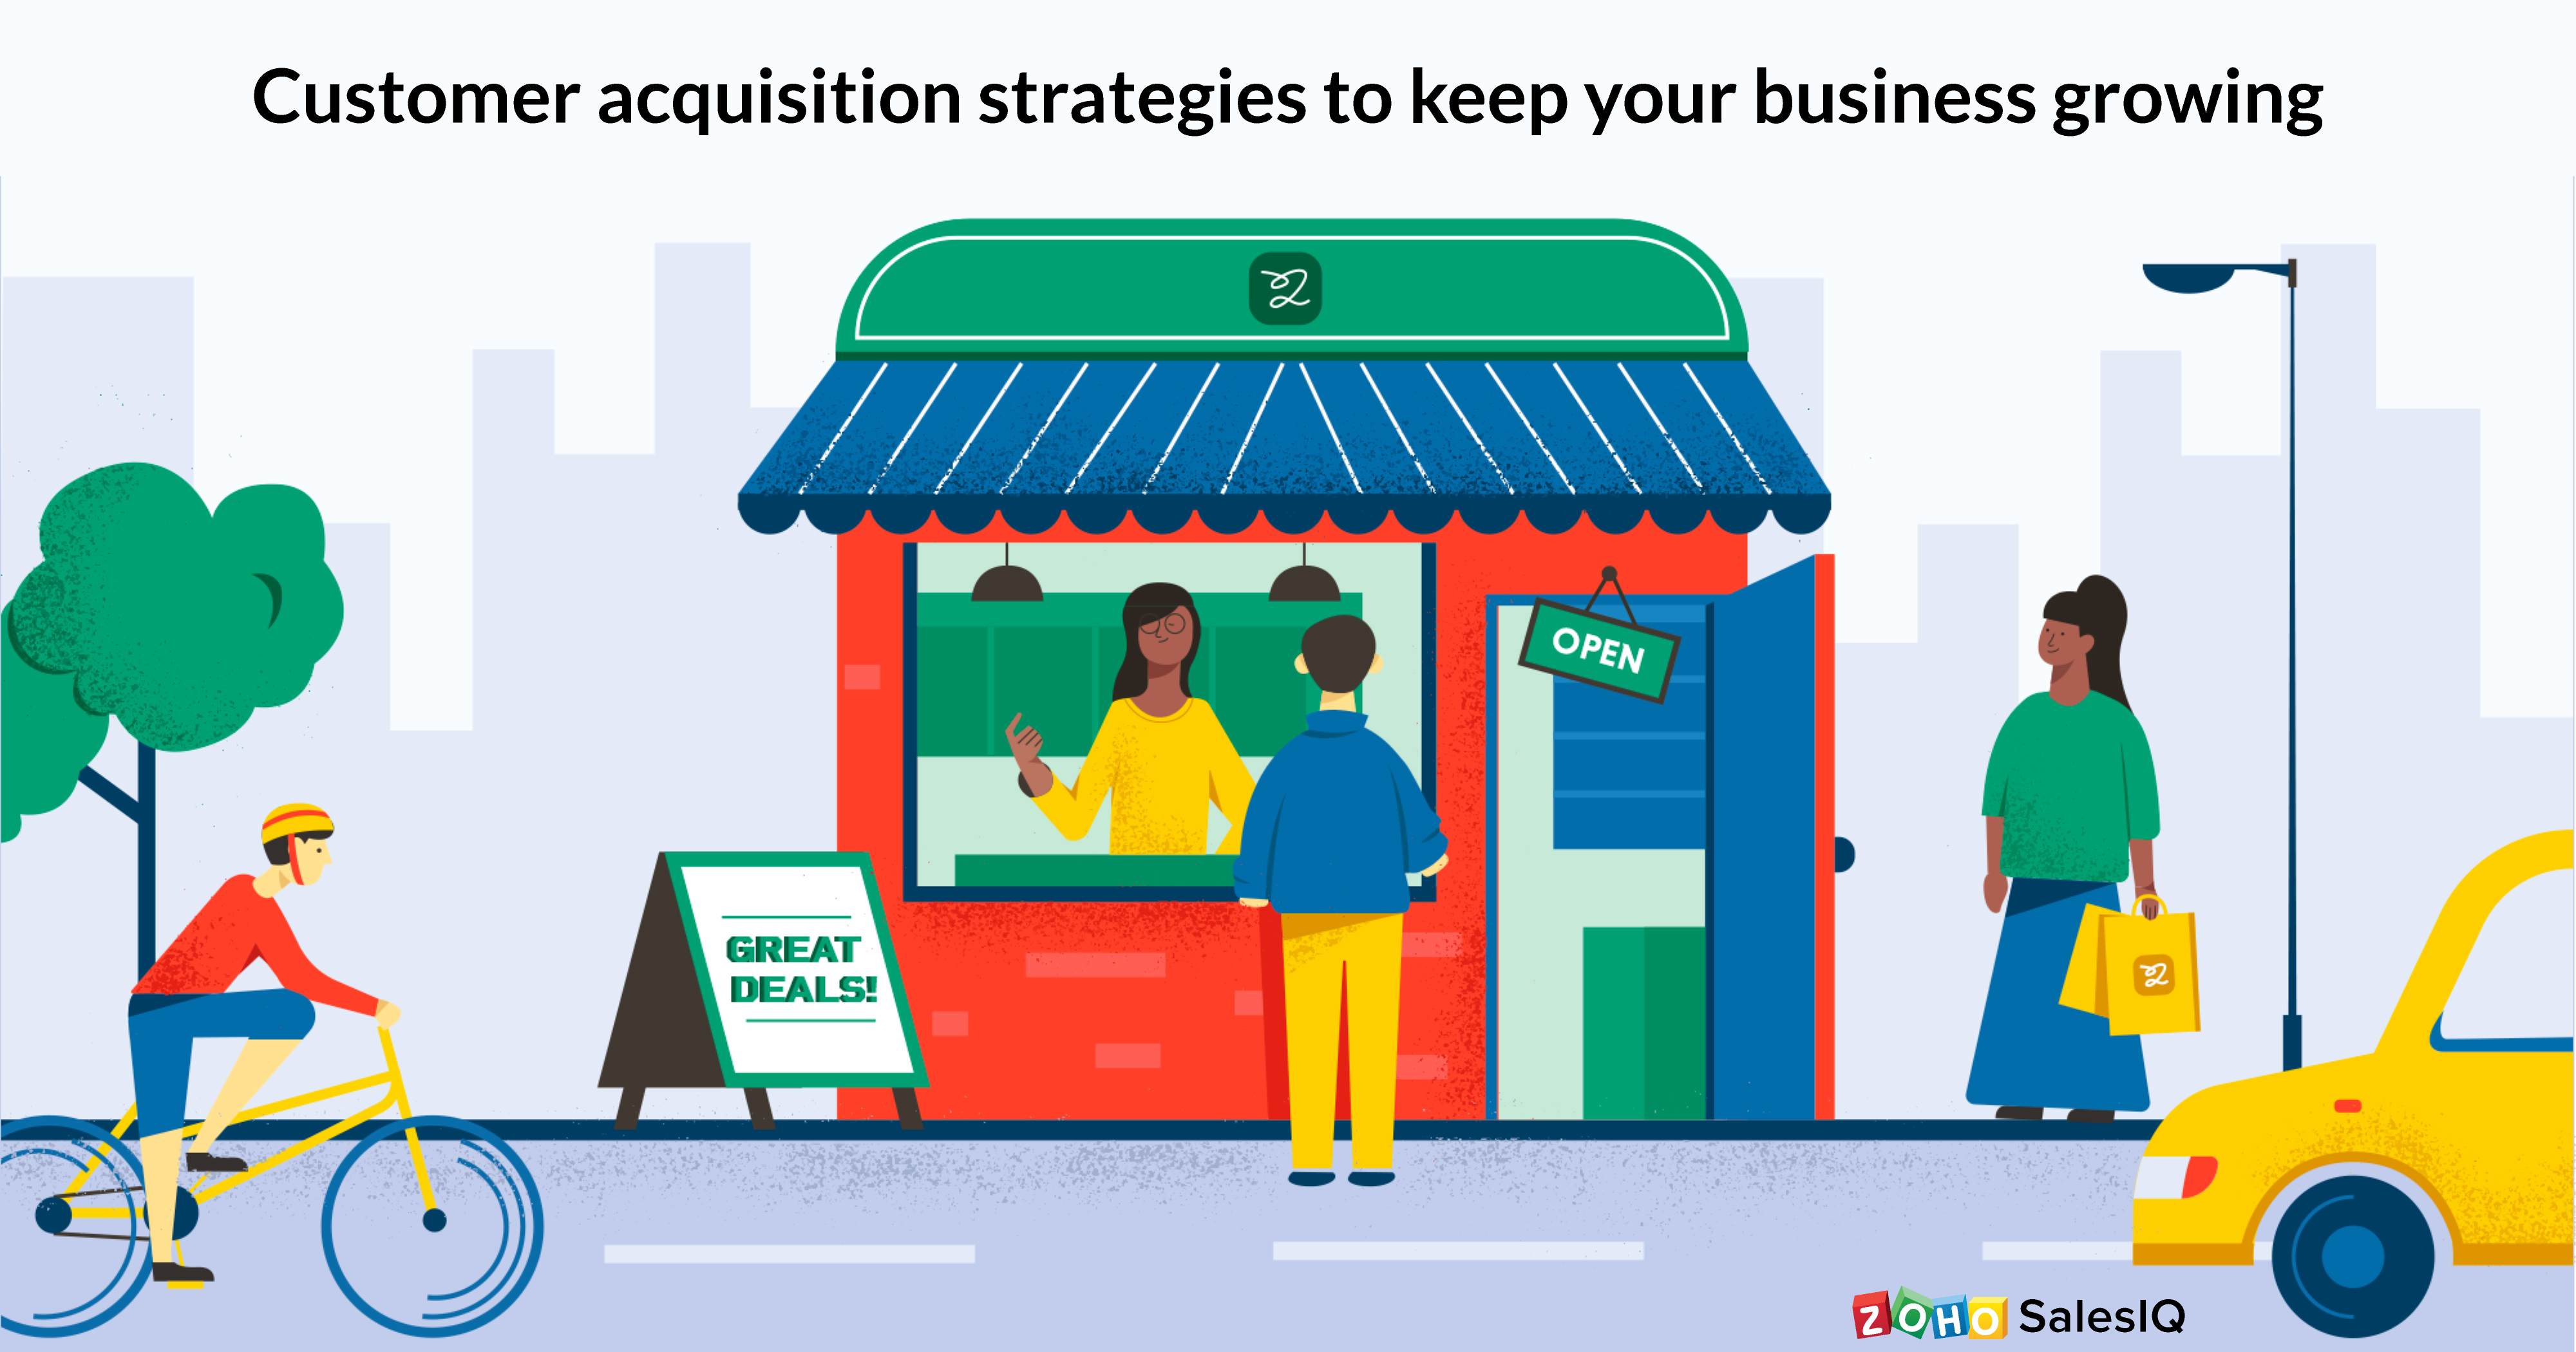 Customer acquisition done right: 4 strategies to grab their attention and win them over